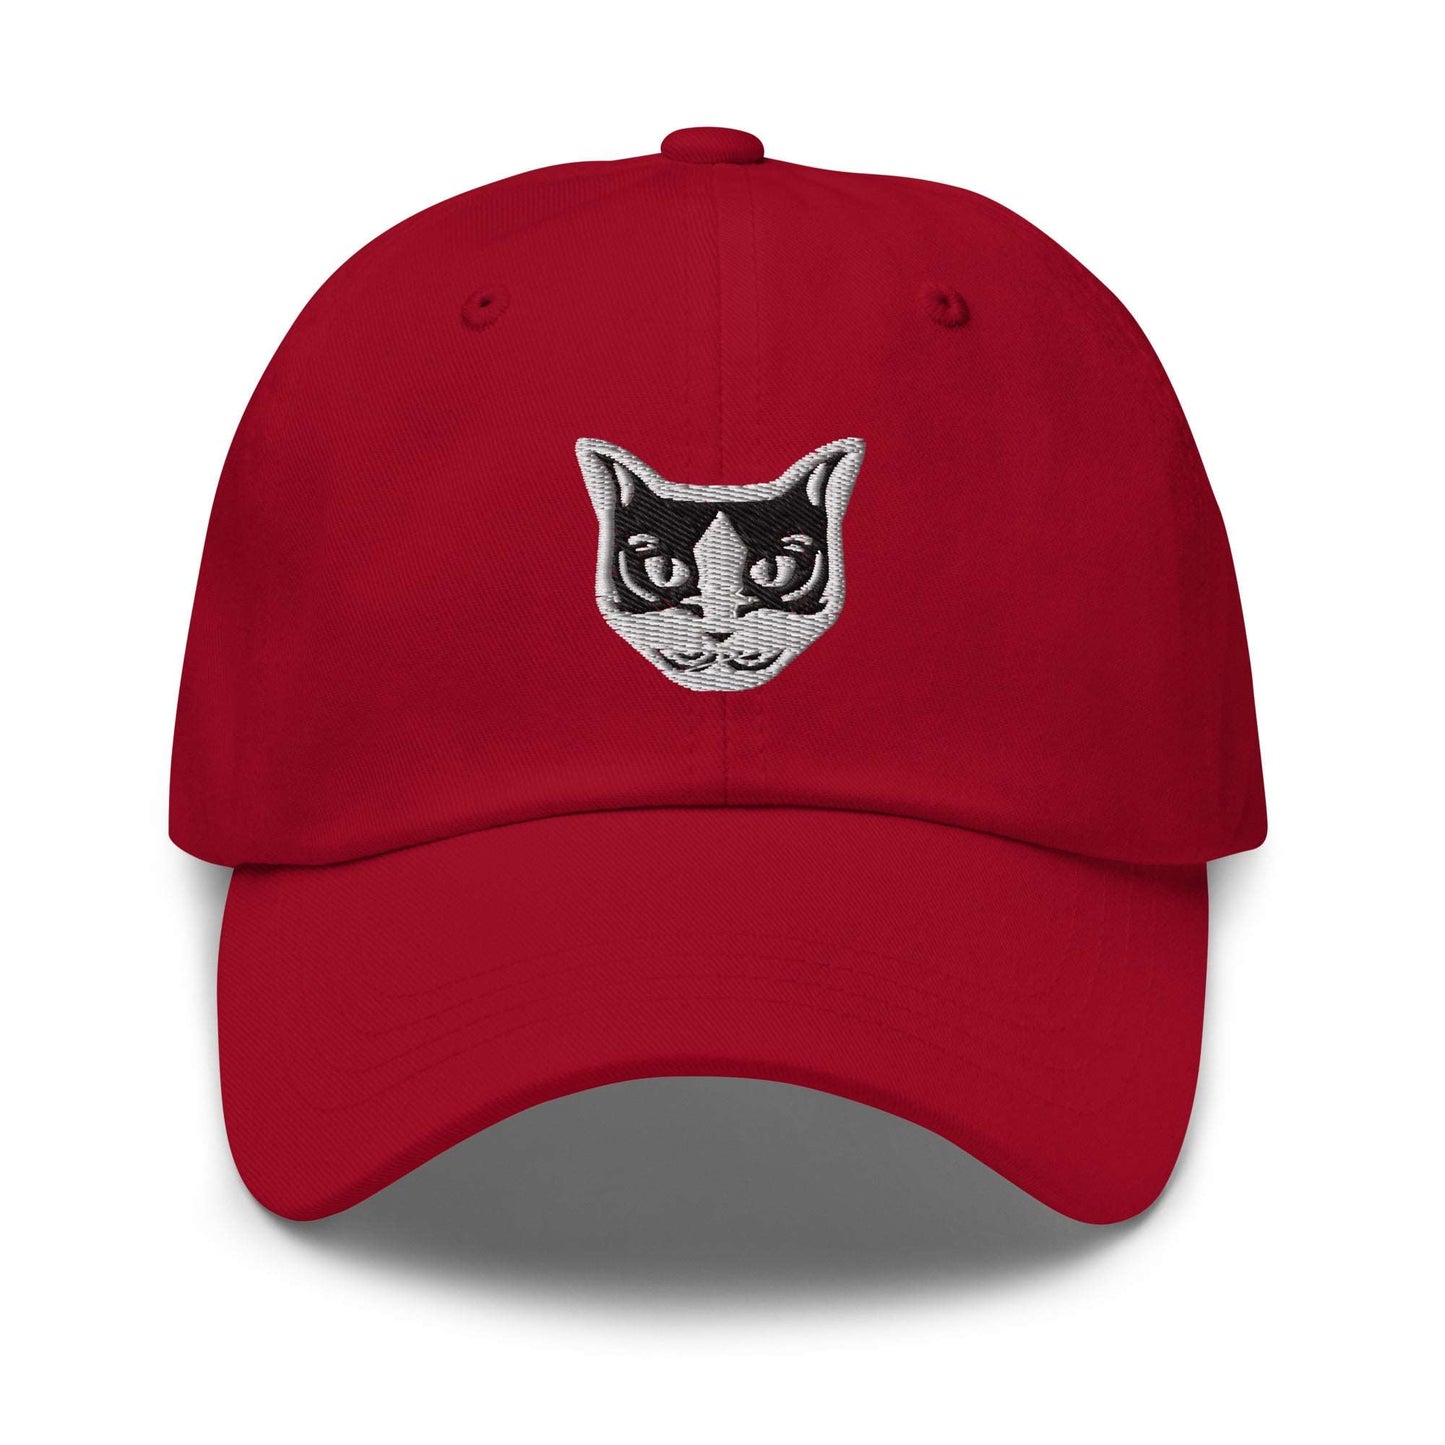 Classic hat - Black and White Cat - Tribal